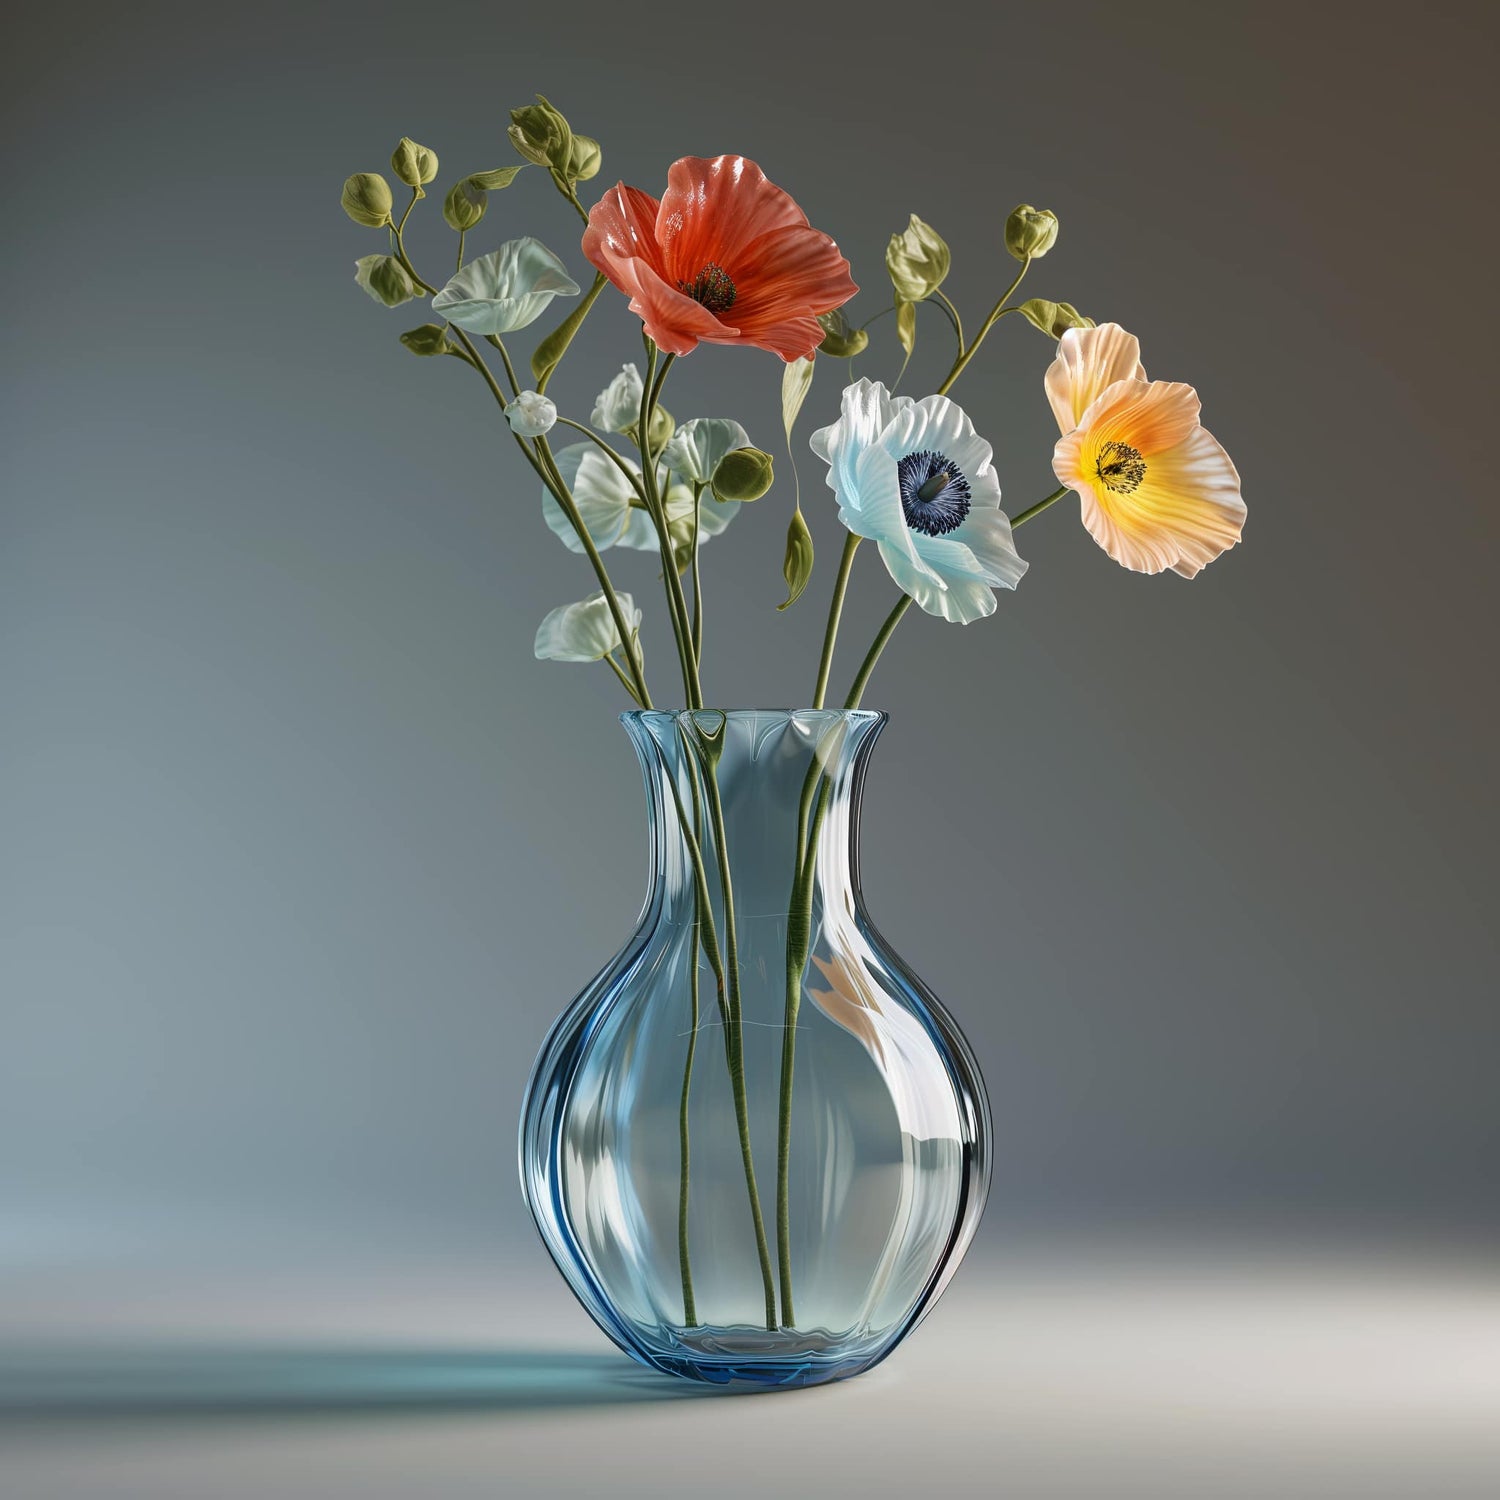 Gorgeous Flowers in a Glass Vase